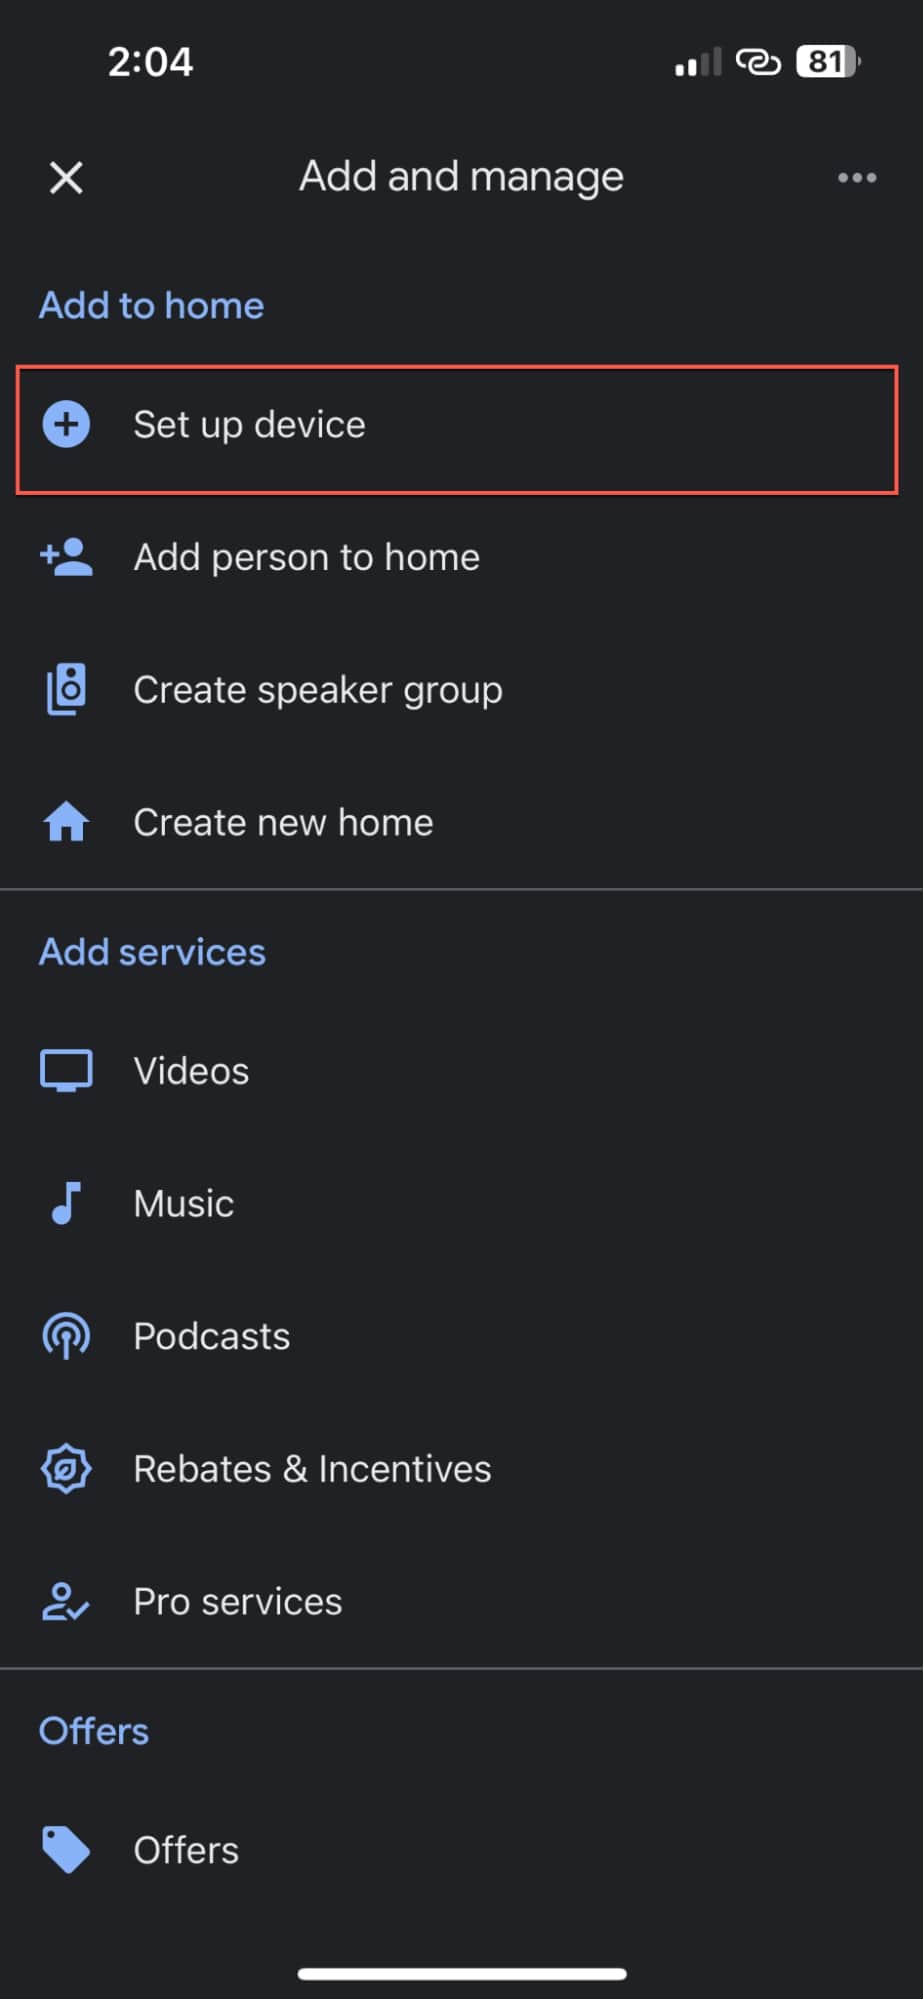 Select the Set up device on Google Home